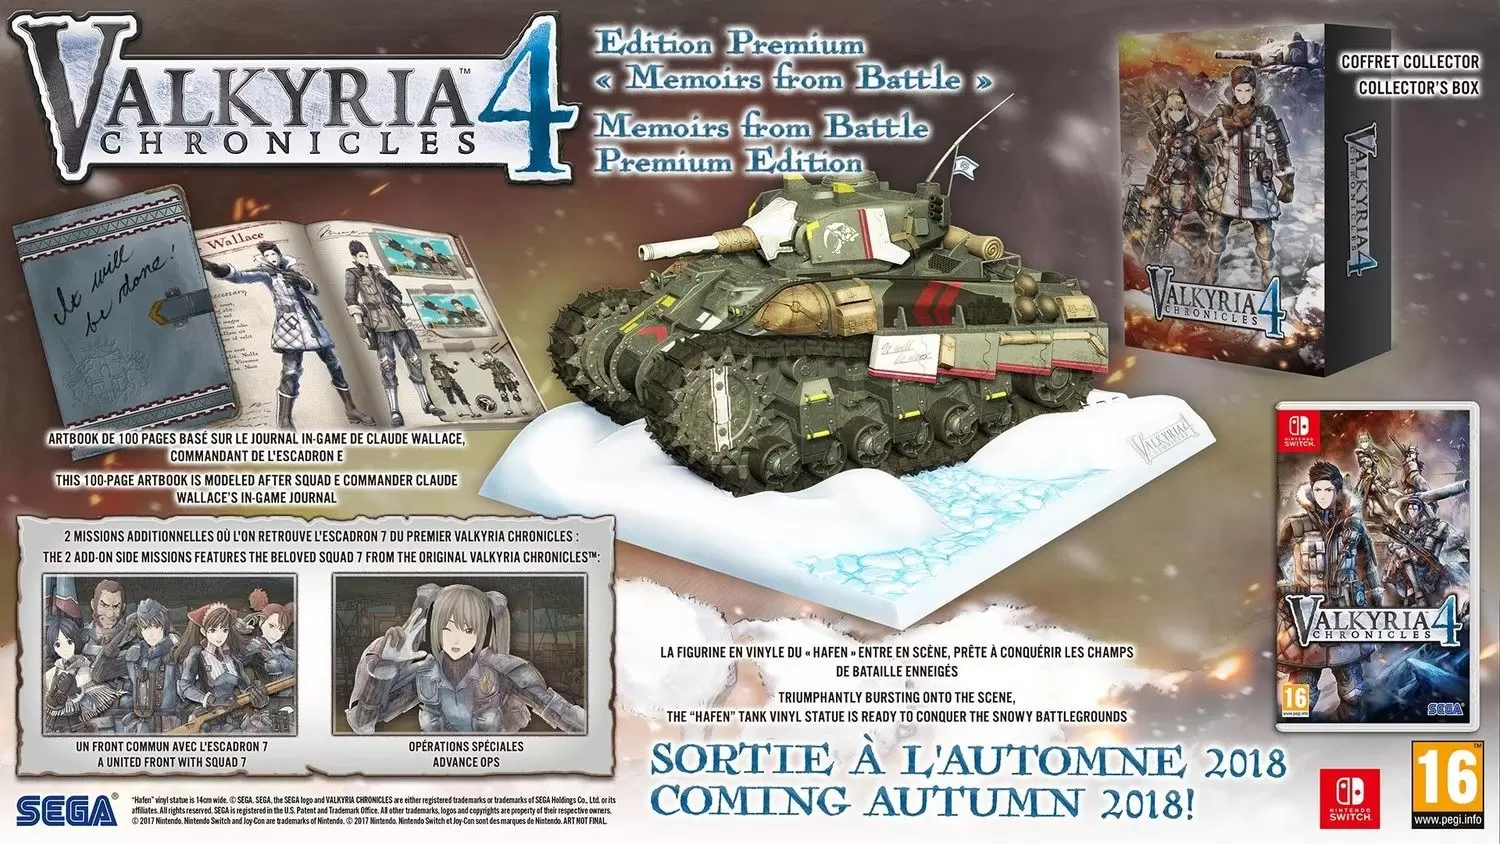 Nintendo Switch Games - Valkyria Chronicles 4 - Memoirs From Battle Premium Edition